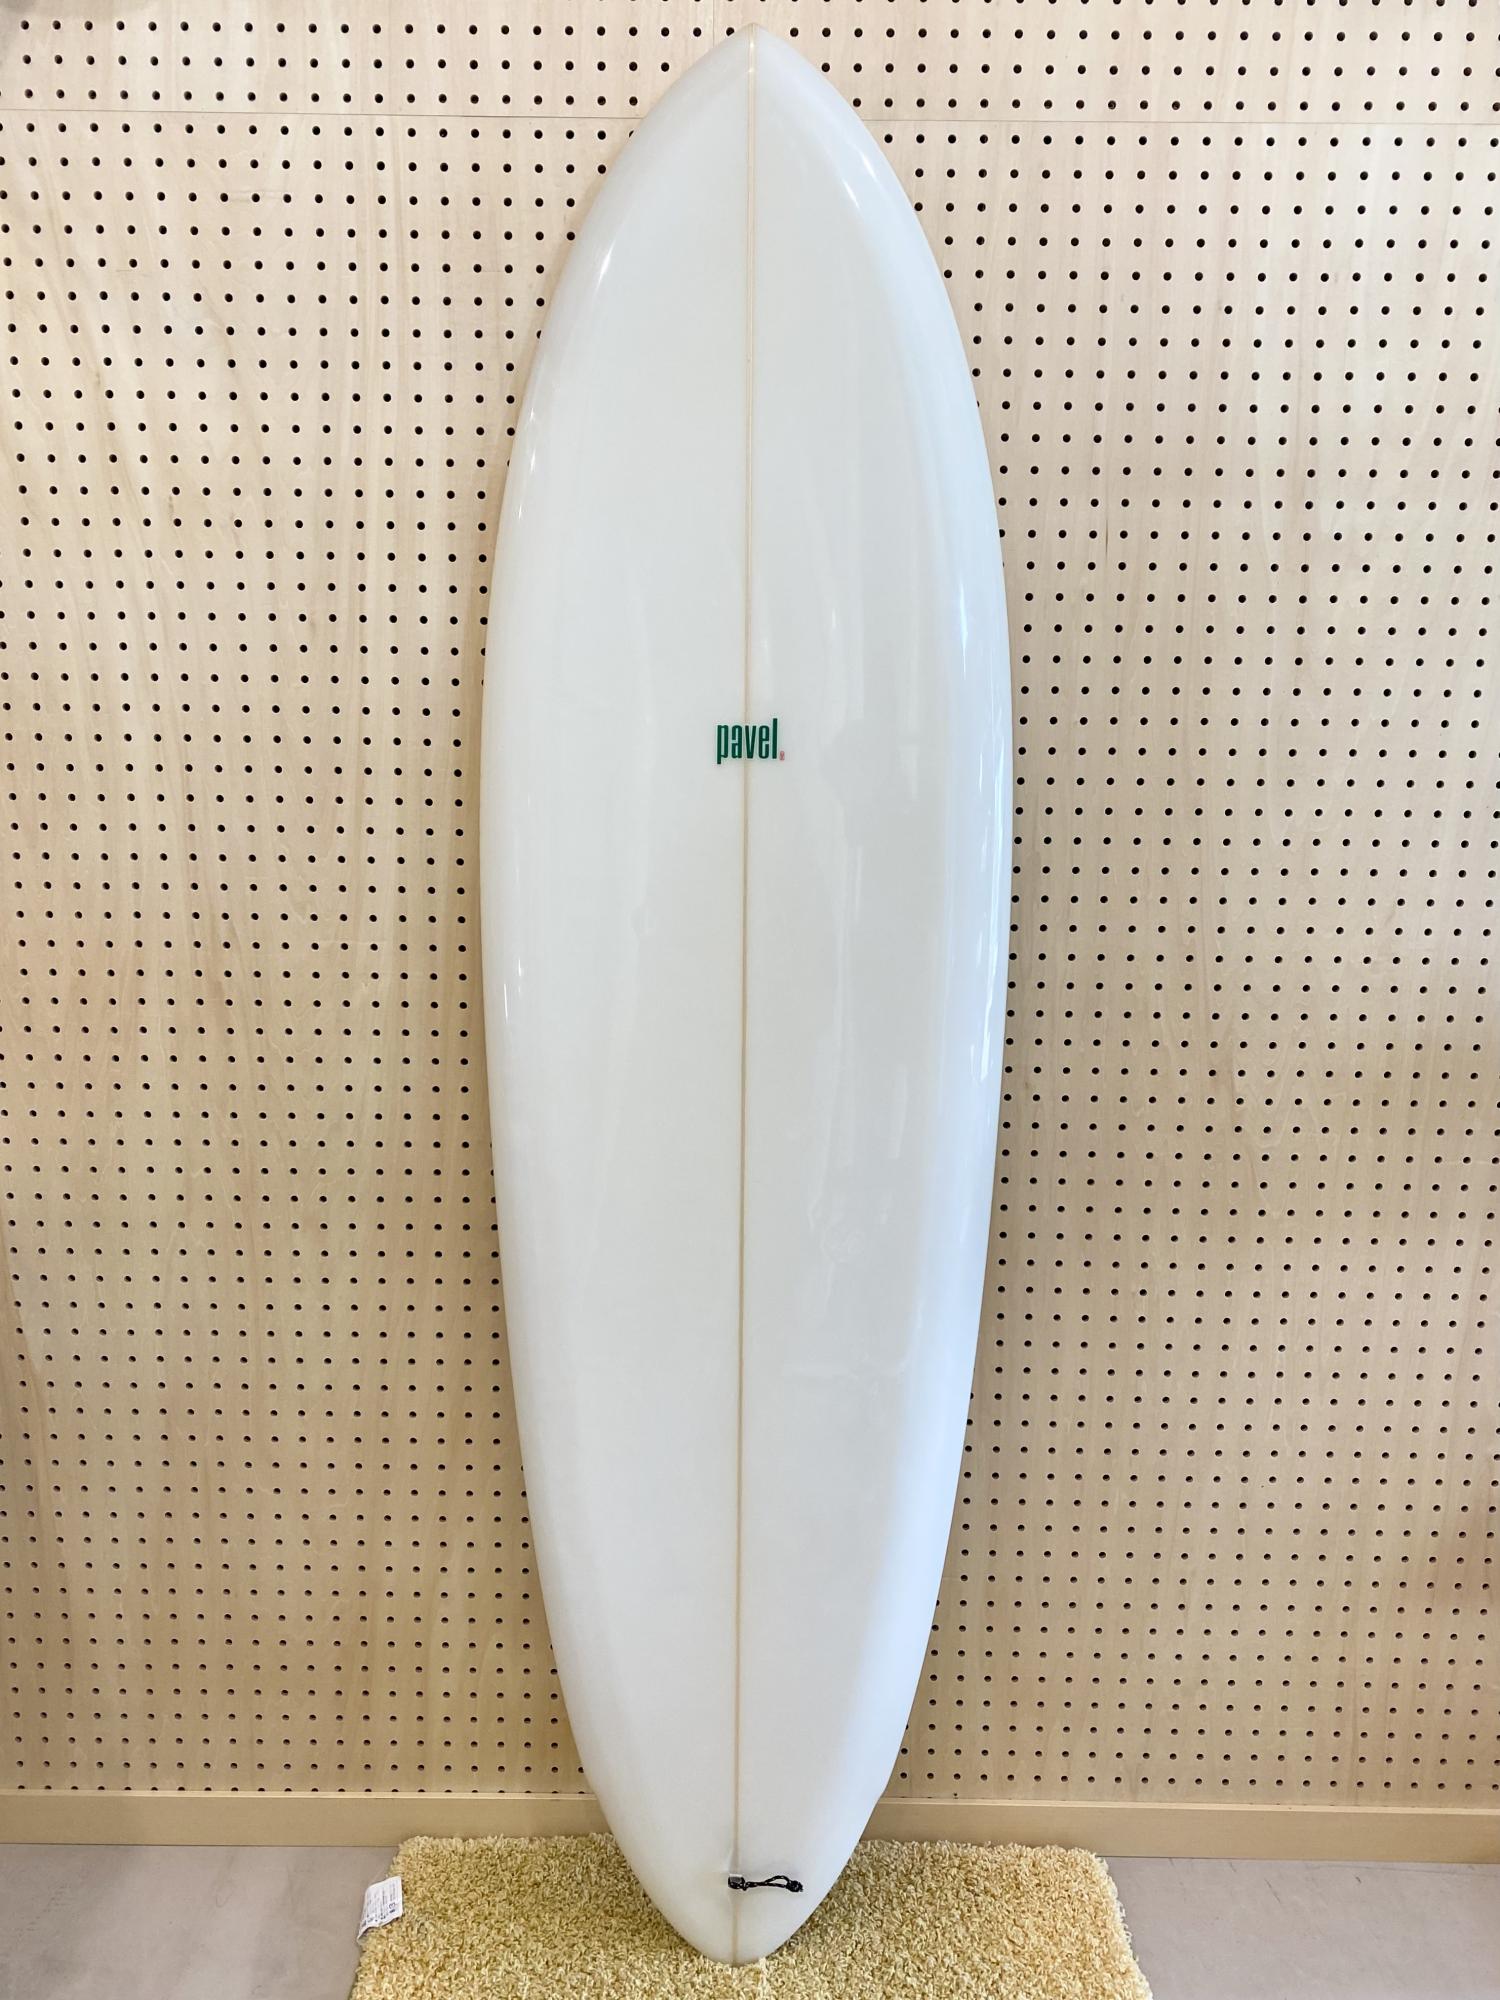 USED BOARDS (6.2 Rich Pavel Race Tracker Round Pin Quad)